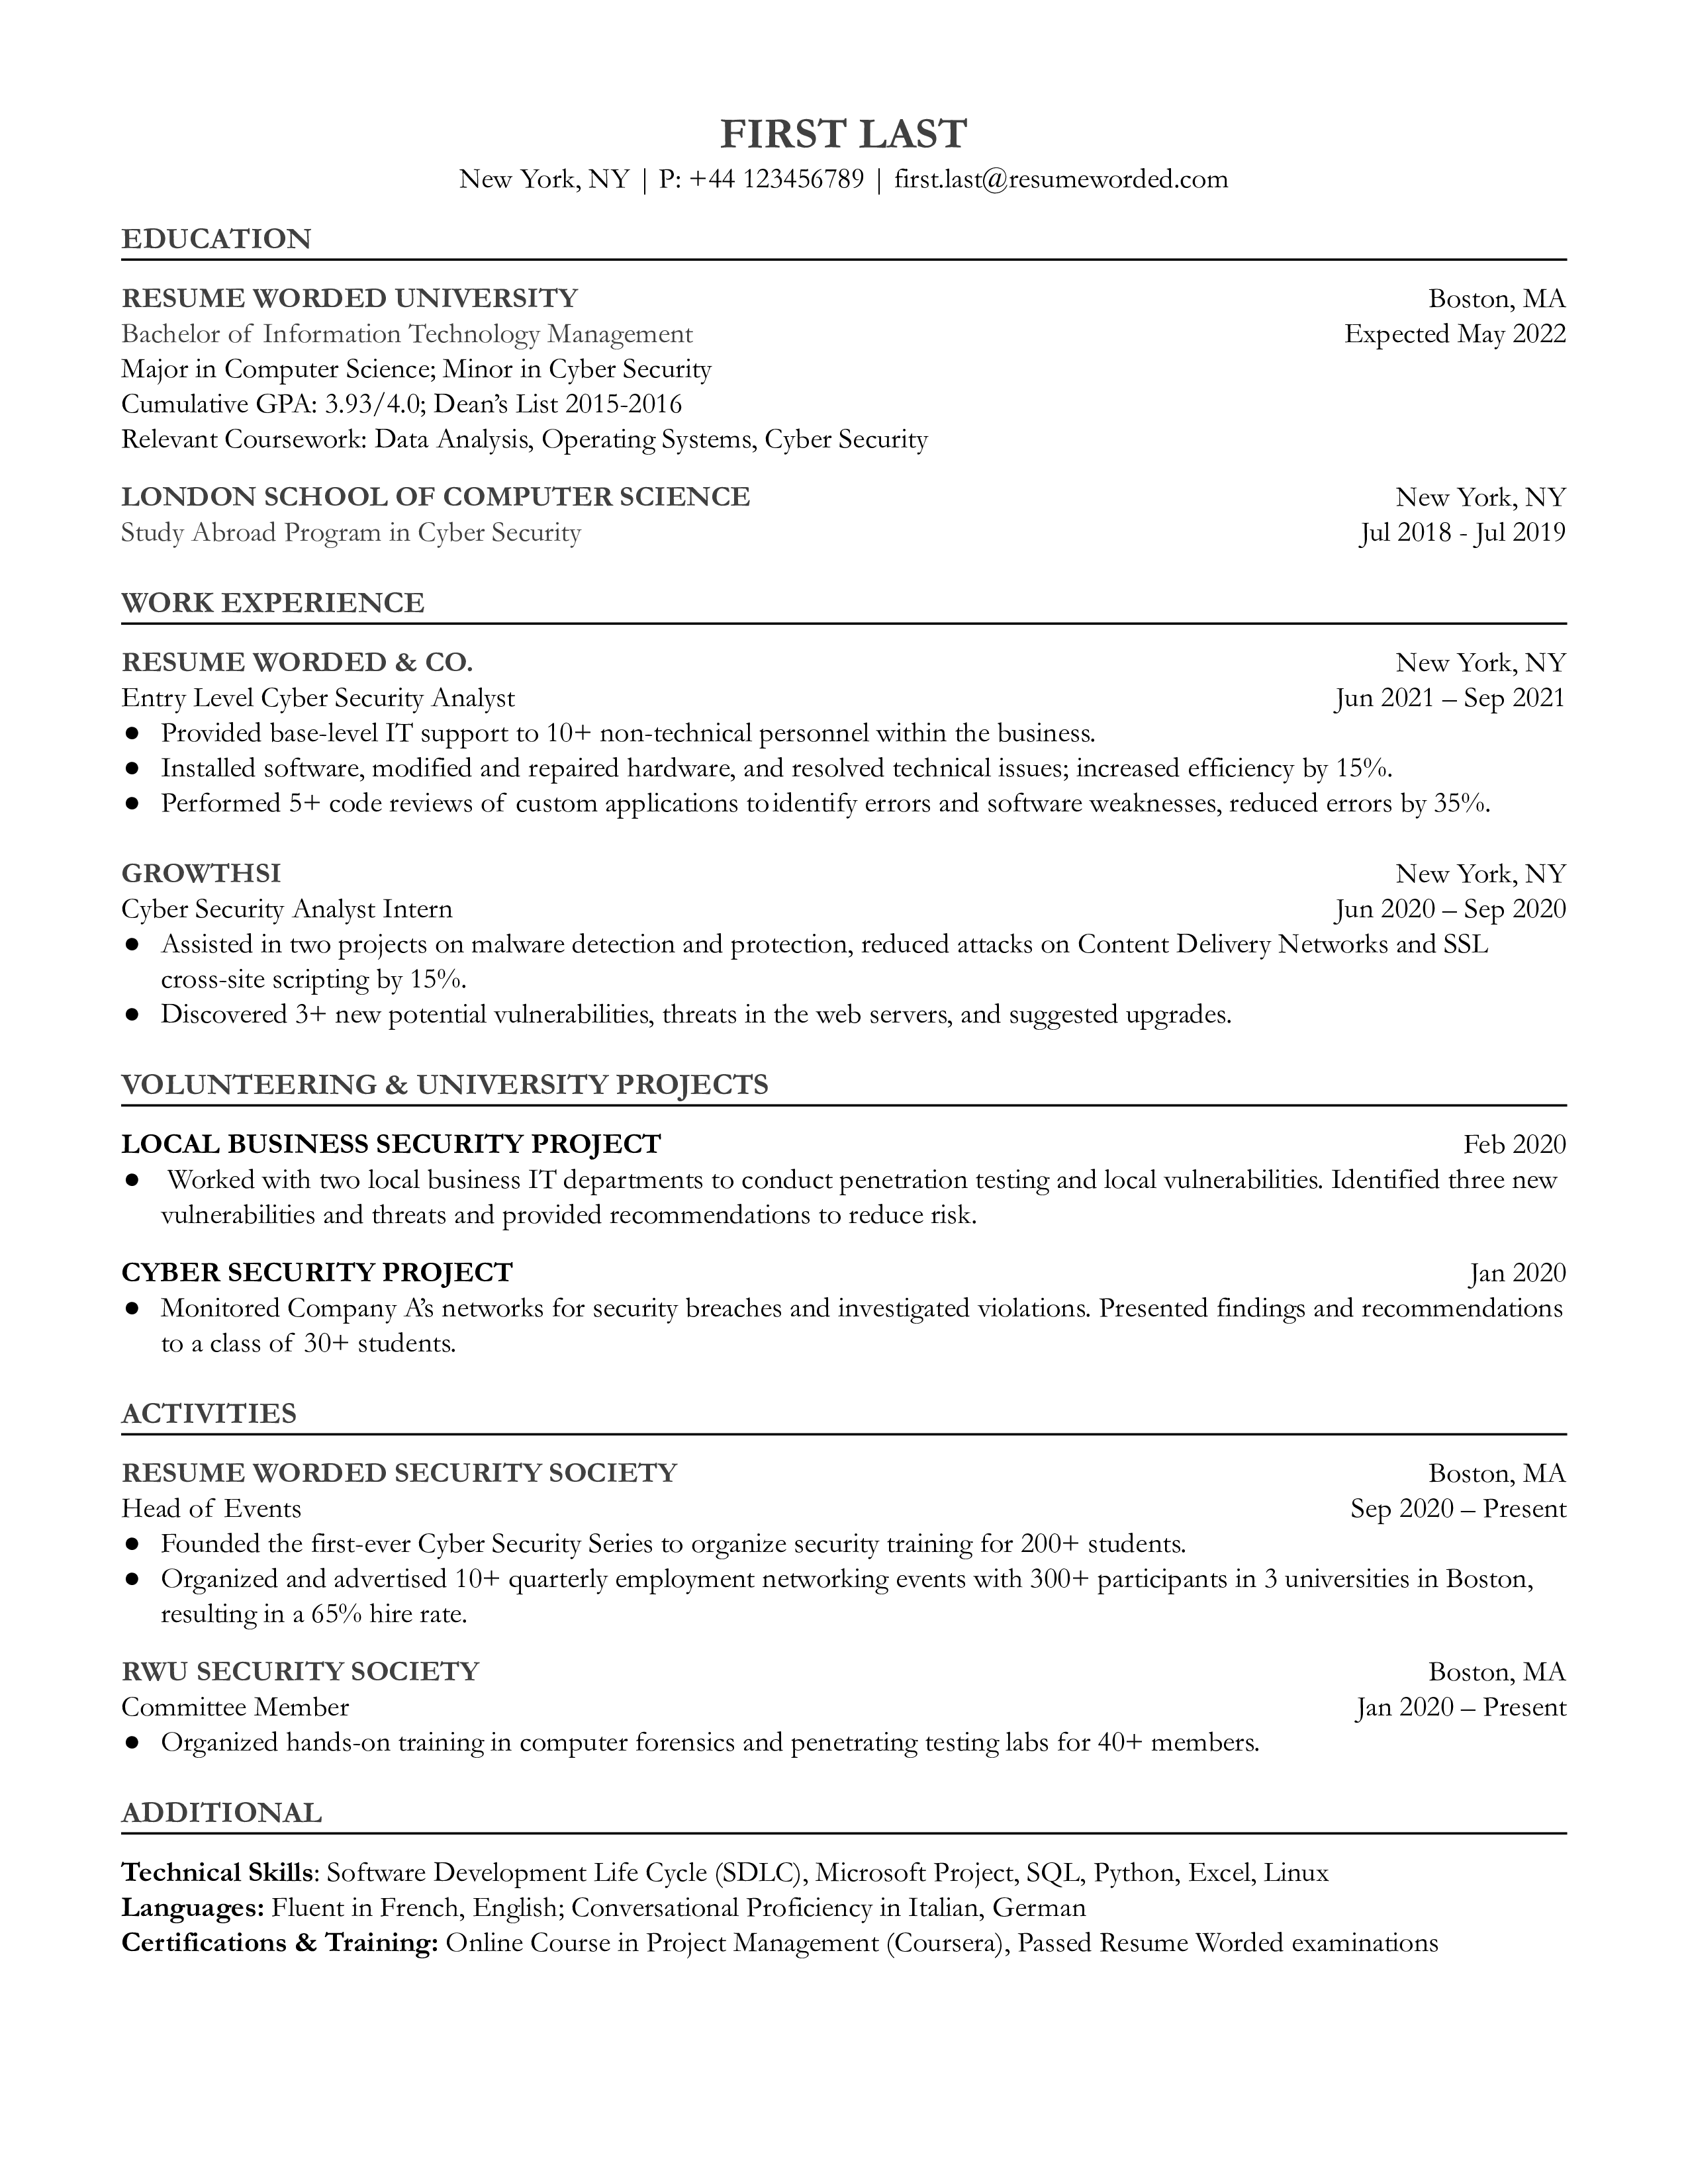 Entry Level Cyber Security Analyst Resume Template + Example